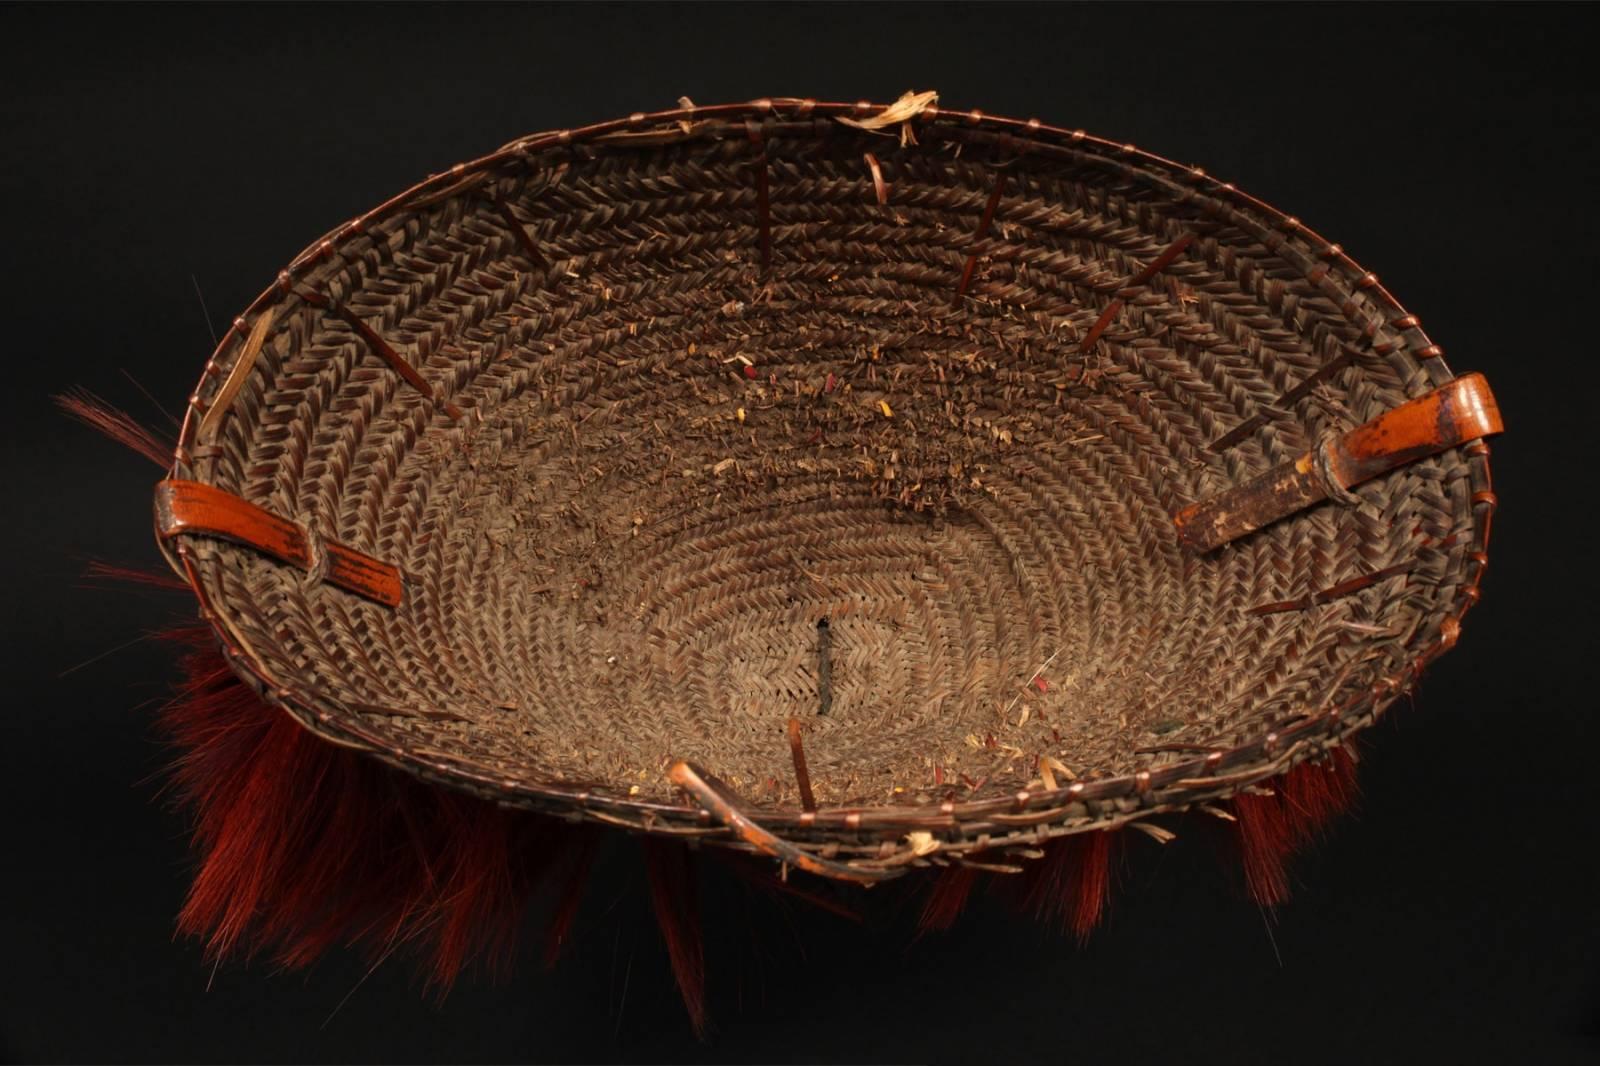 Woven Early 20th Century Tribal Cane Warrior's Hat, Nagaland, Northeast India